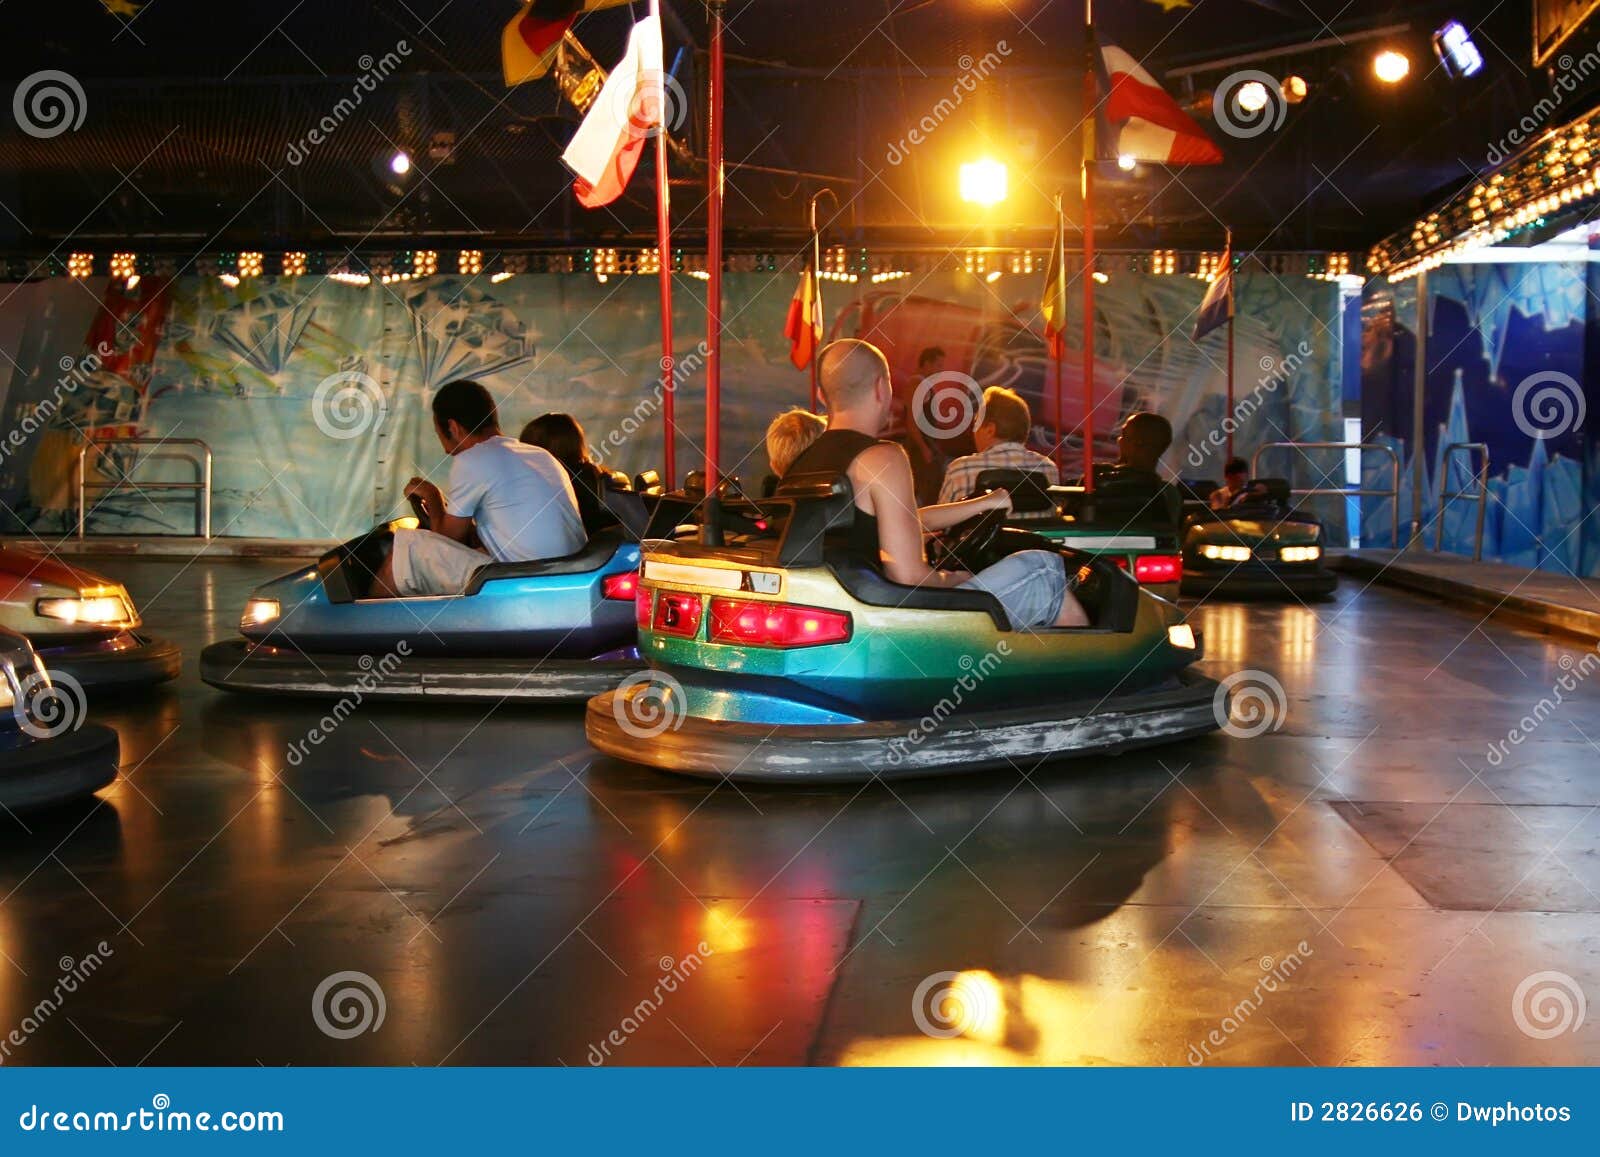 Dodgem Cars Stock Photo. Image Of Fast, Learn, Growing - 2826626